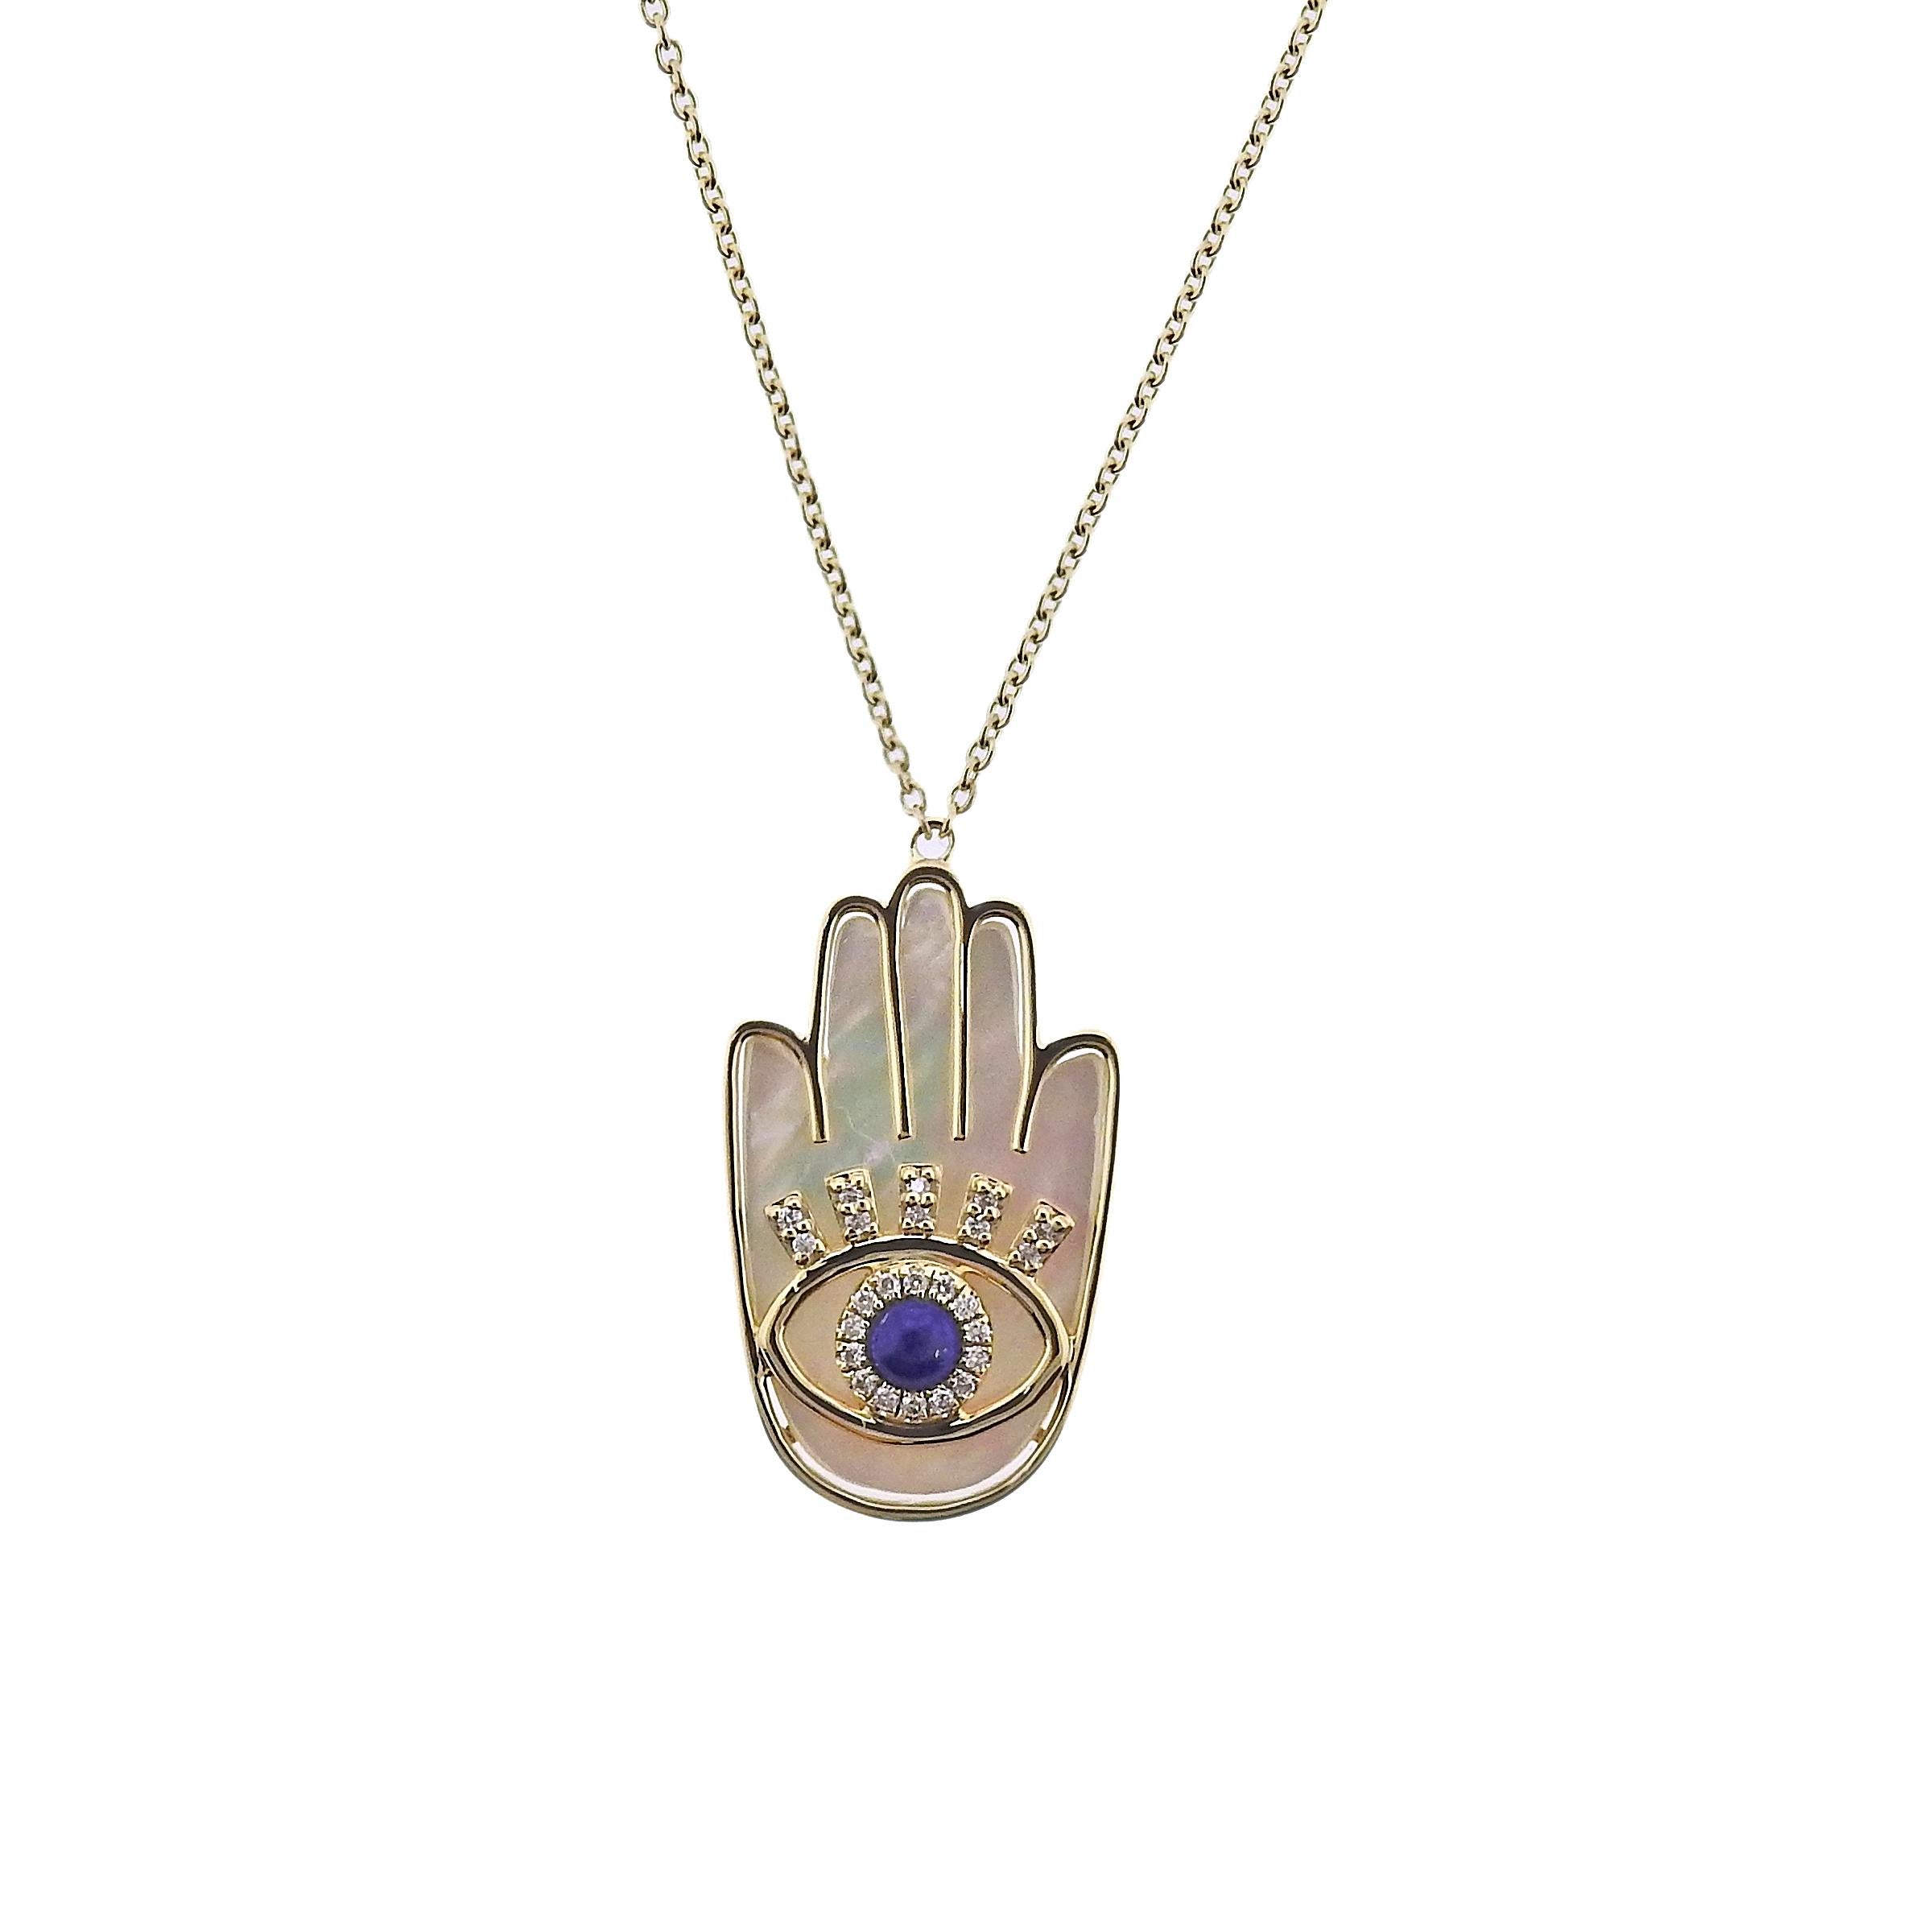 Brand new pendant necklace by Doves Doron Paloma, featuring Hamsa hand of God, adorned with mother of pearl, lapis and 0.07ctw H/VS diamonds.  Necklace is 18